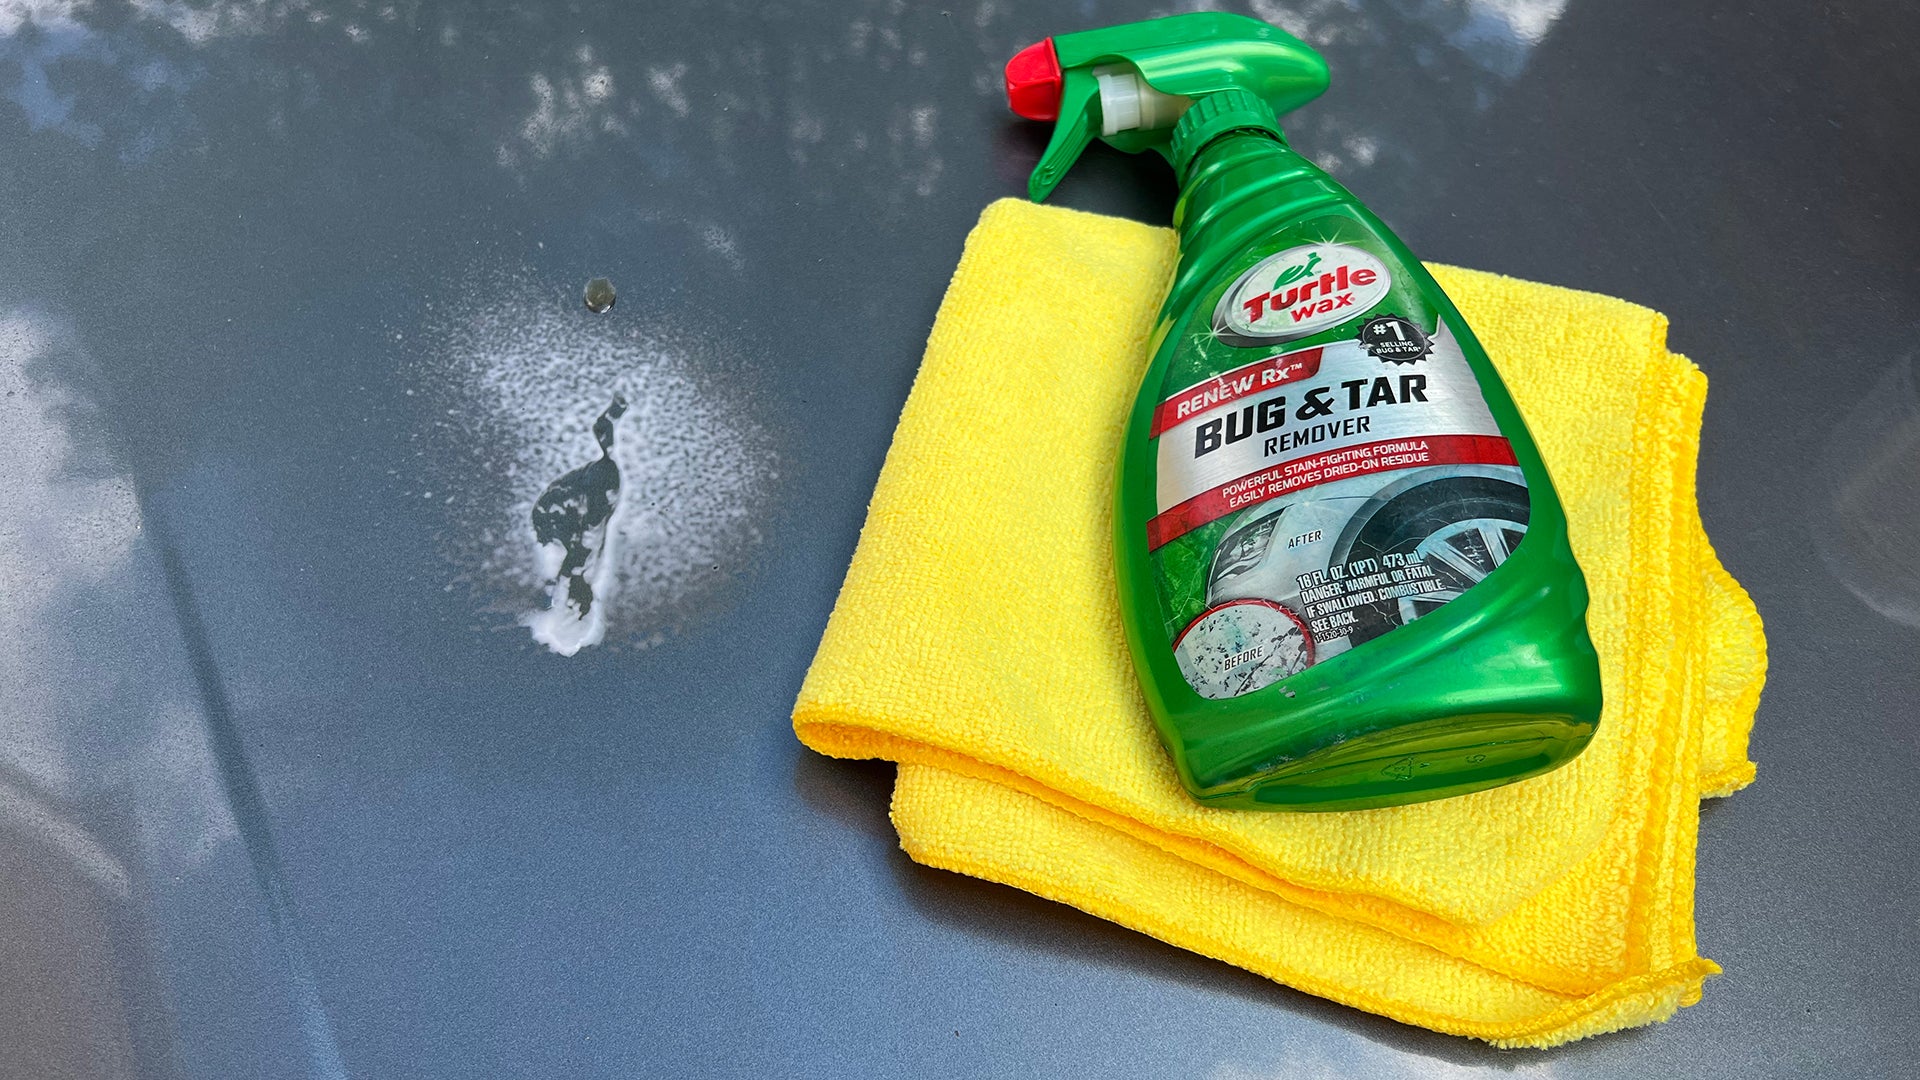 Formula 1 Bug and Tar Remover - Sap, Tar, Dirt & Bug Remover Car Detailing  - Powerful Car Cleaner - Exterior Care Products Won't Scratch Paint (16 oz)